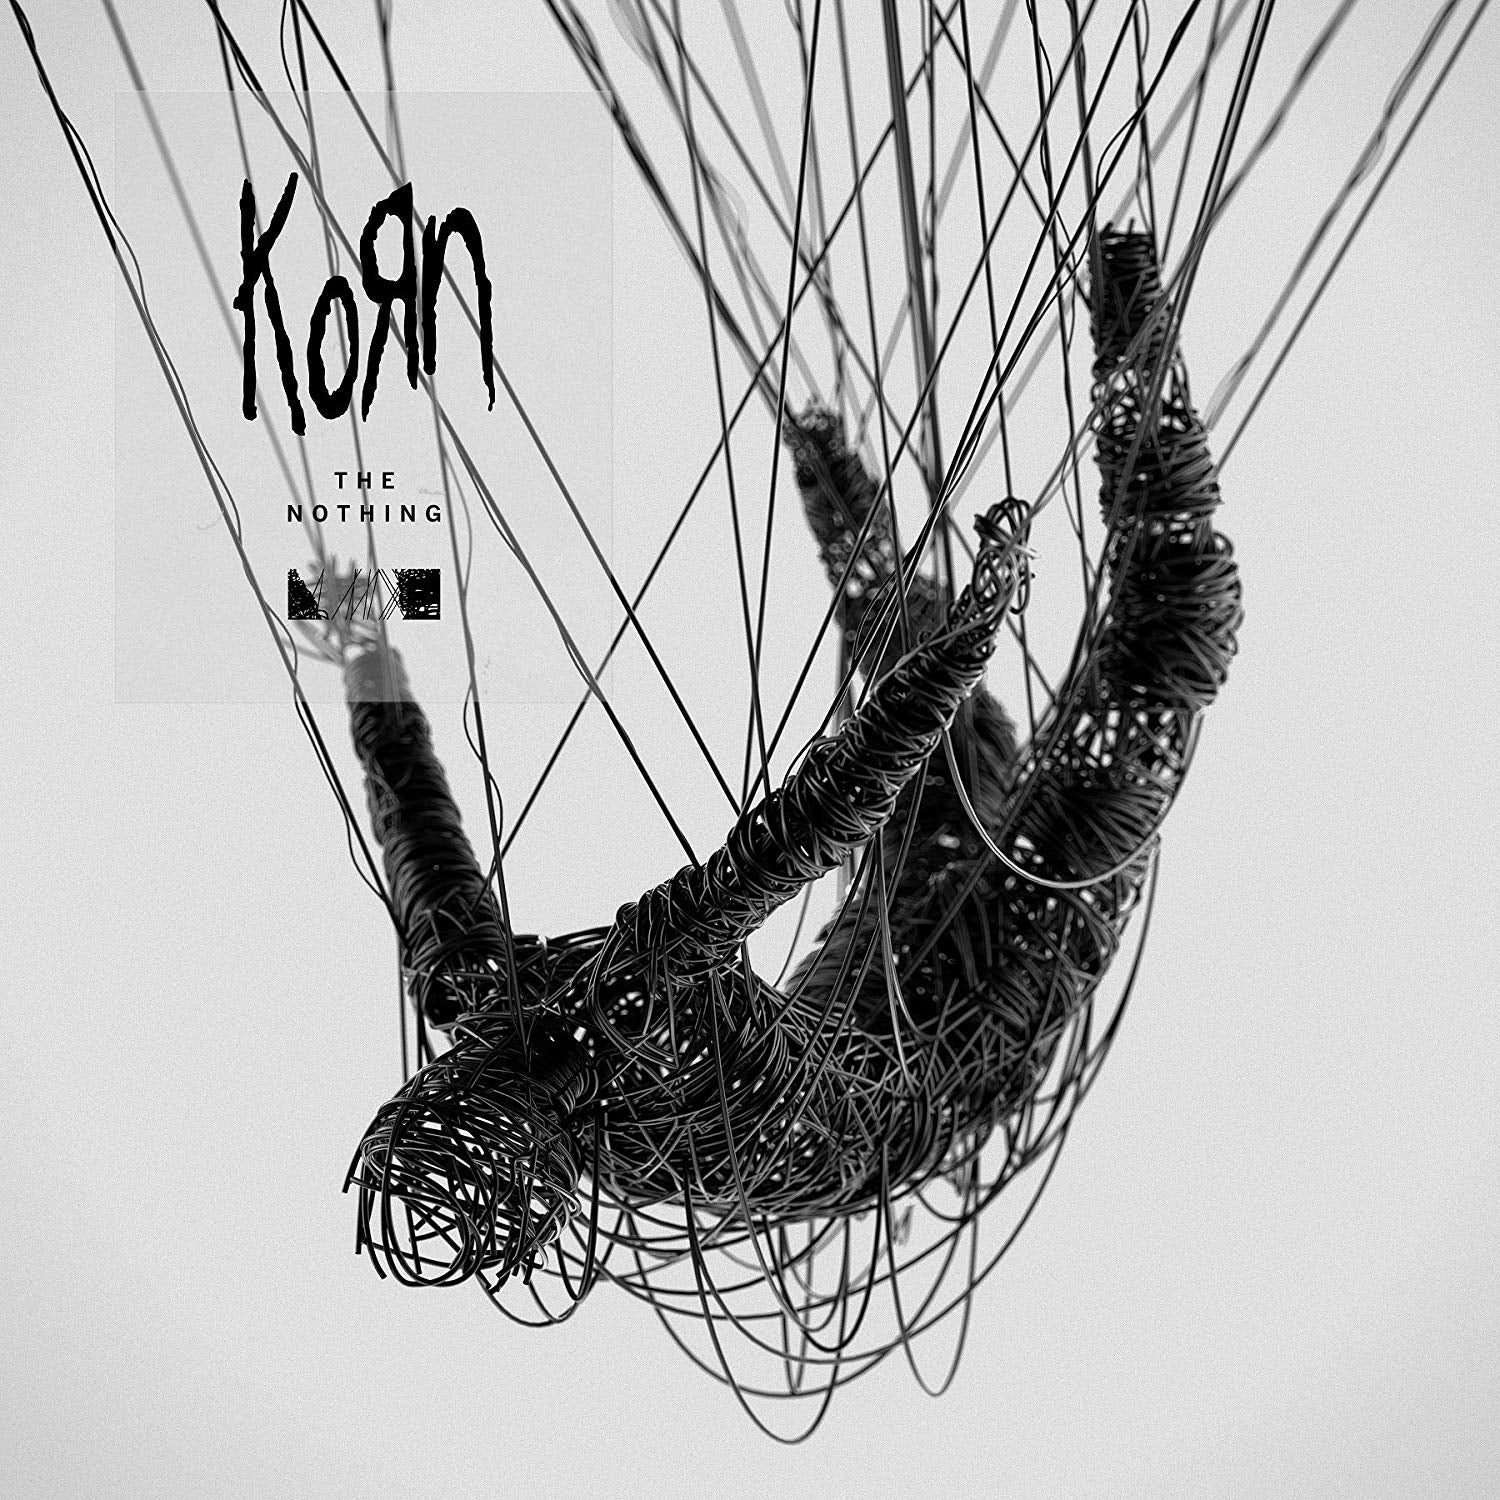 Korn "The Nothing" CD